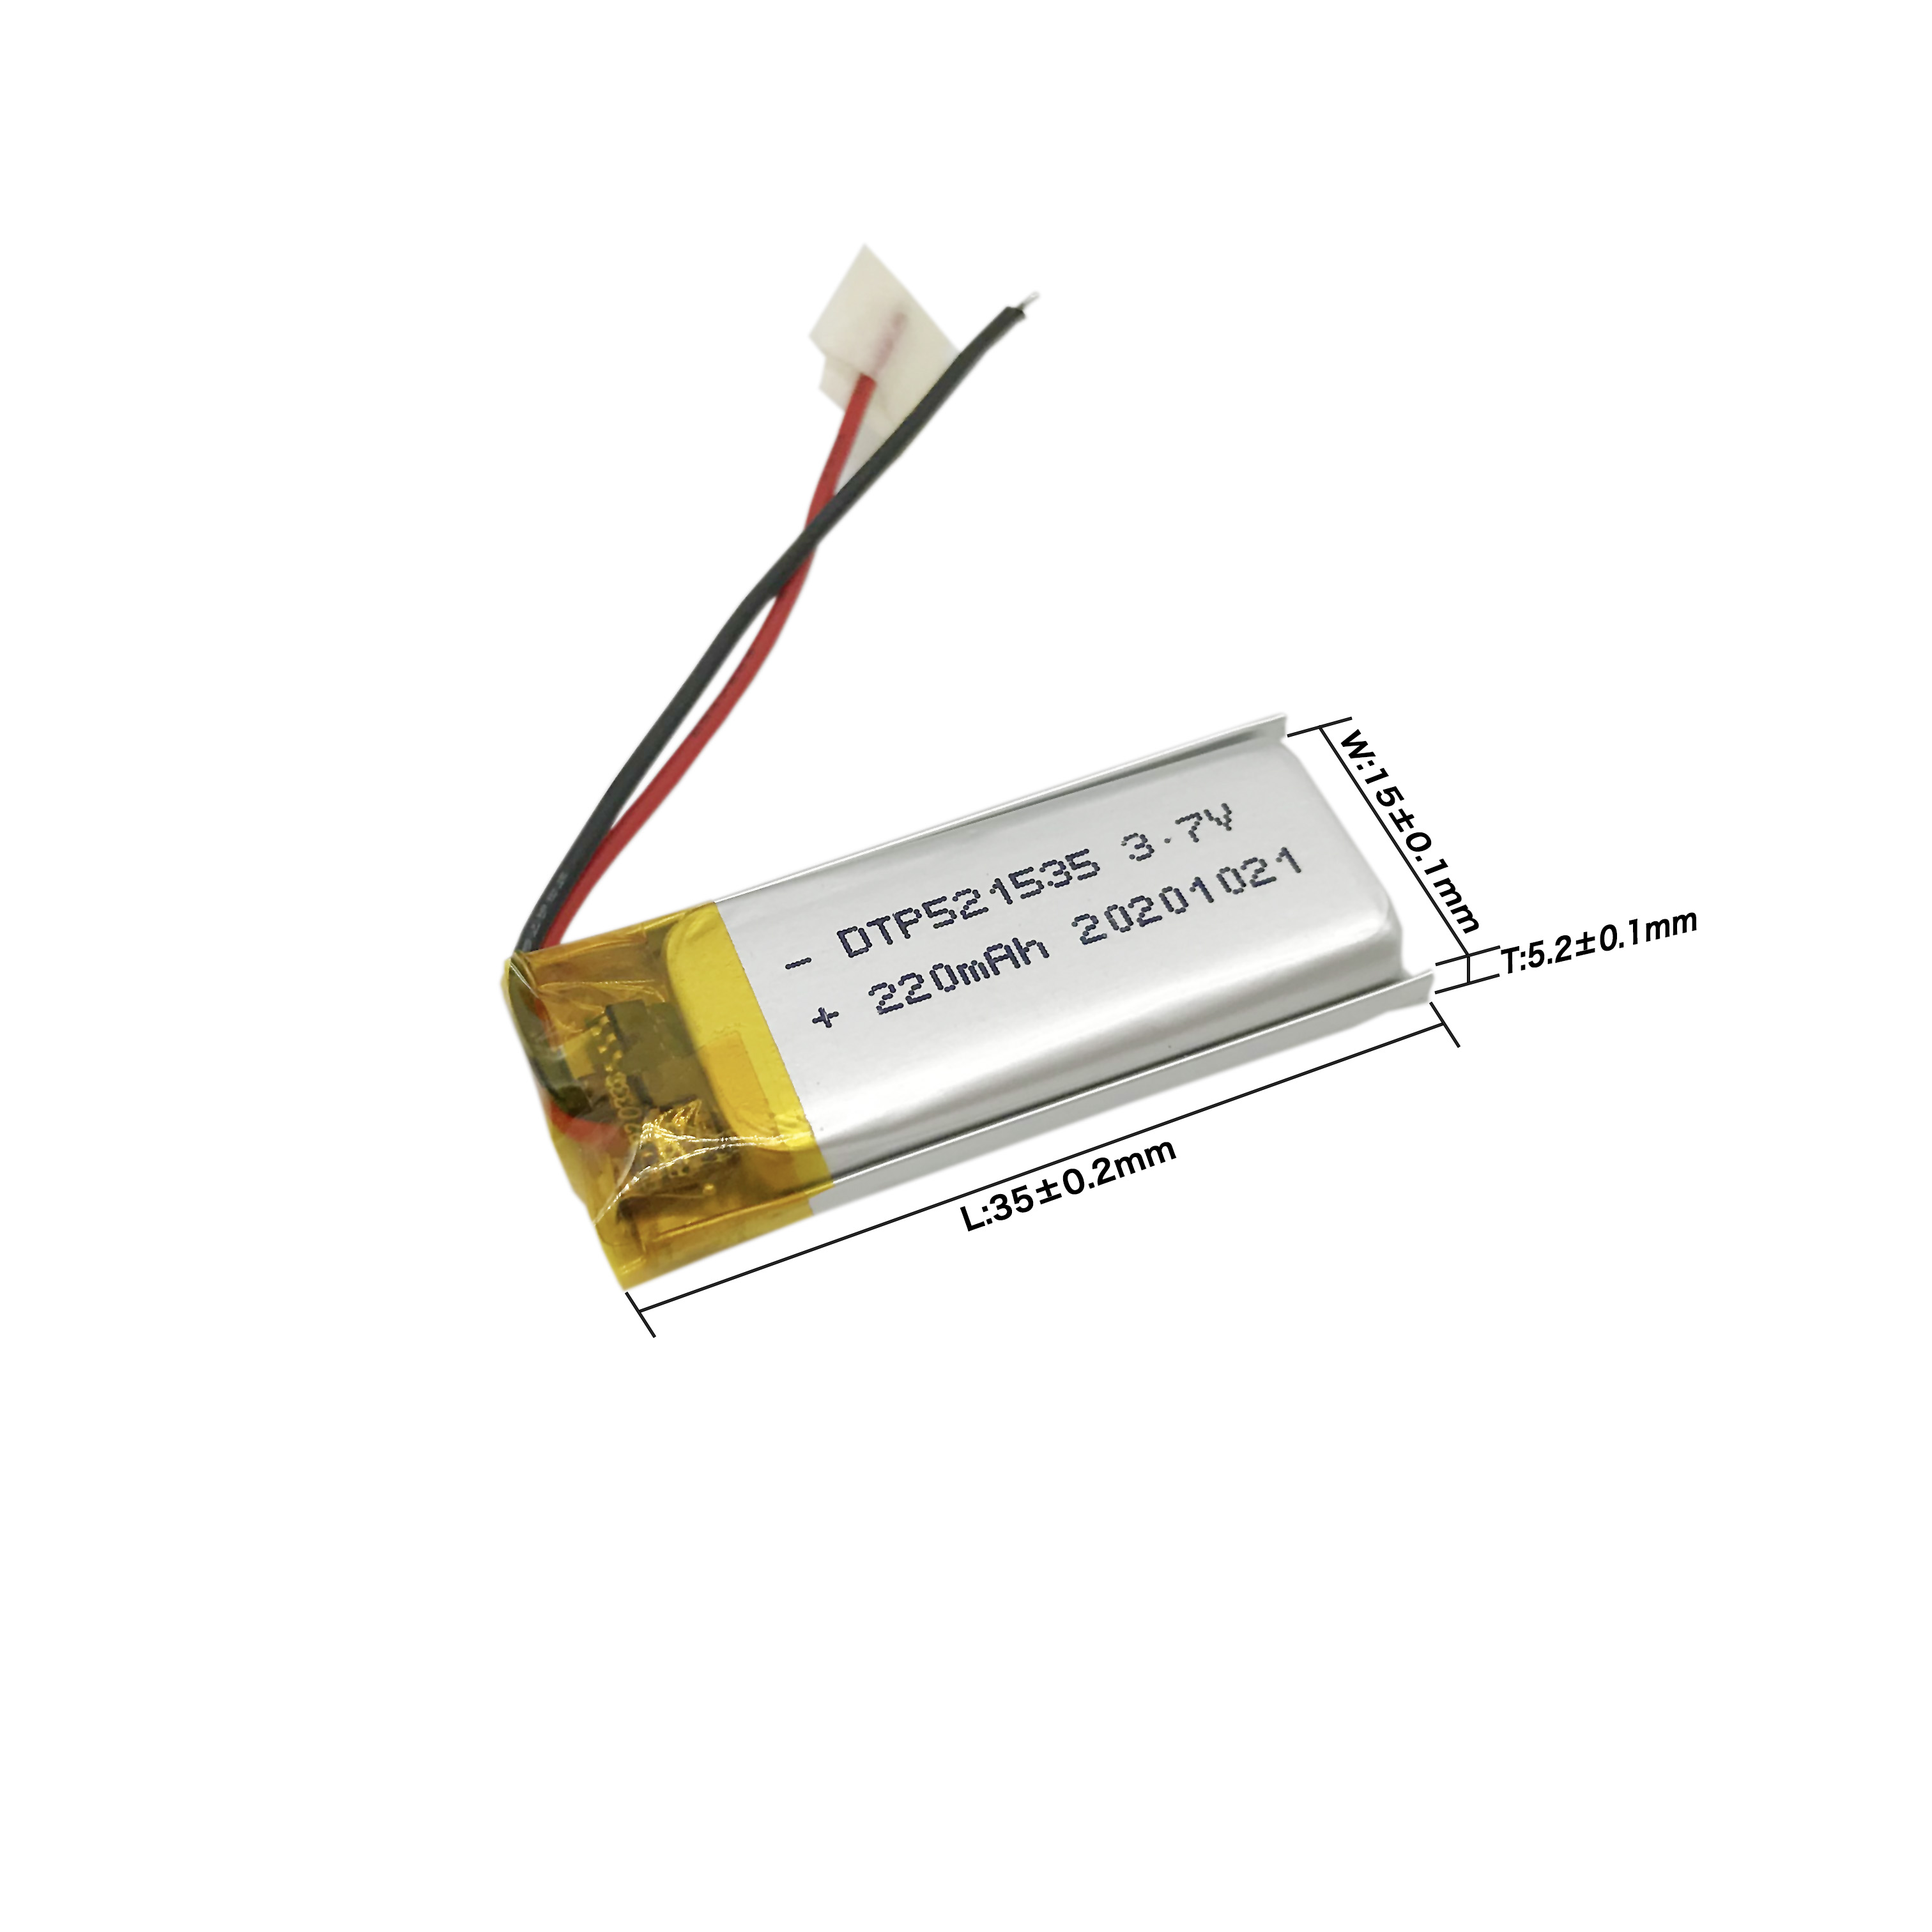 Rechargeable Lithium Polymer Battery 3.7V 220mAh Lipo Battery 521535 551240 501240